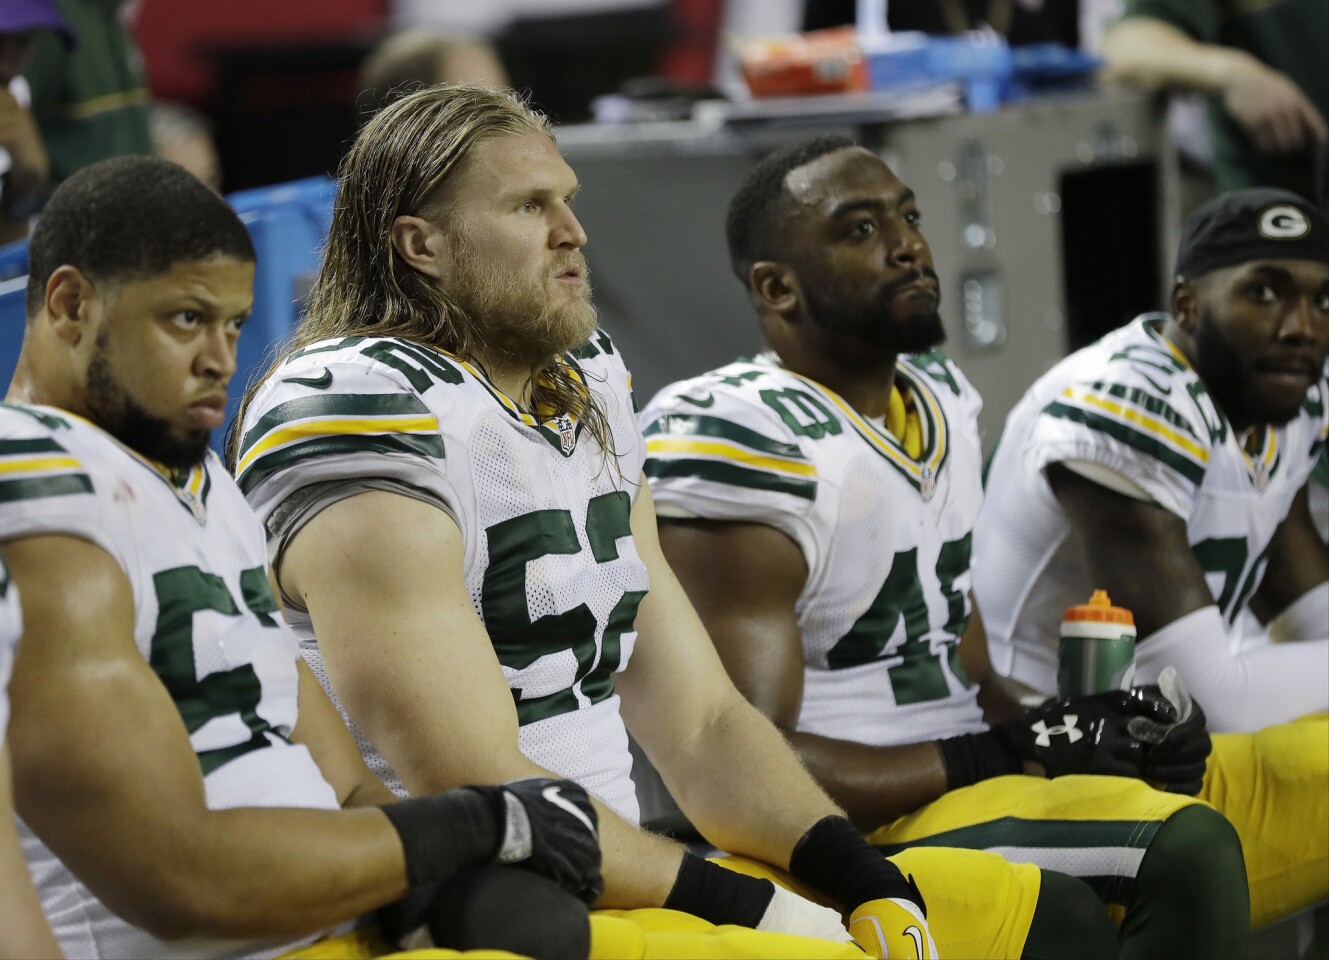 Green Bay Packers players watch play from the bench during the second half of the NFL football NFC championship game against the Atlanta Falcons, Sunday, Jan. 22, 2017, in Atlanta. (AP Photo/David J. Phillip)